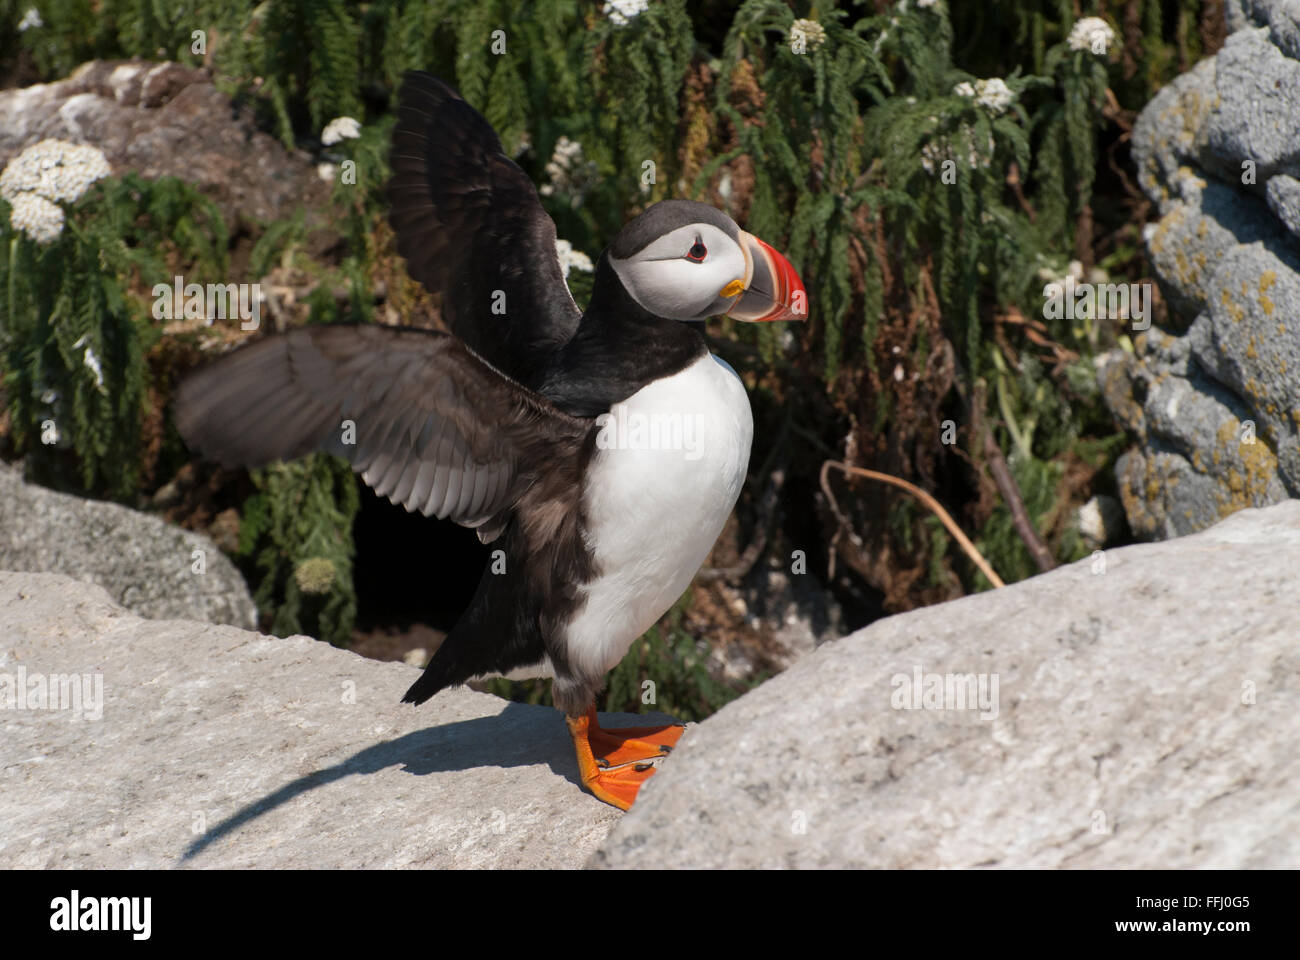 Atlantic Puffin flaps its wings to warn those getting too close to its nest on Machias Seal Island during breeding season near the coast of Maine. Stock Photo